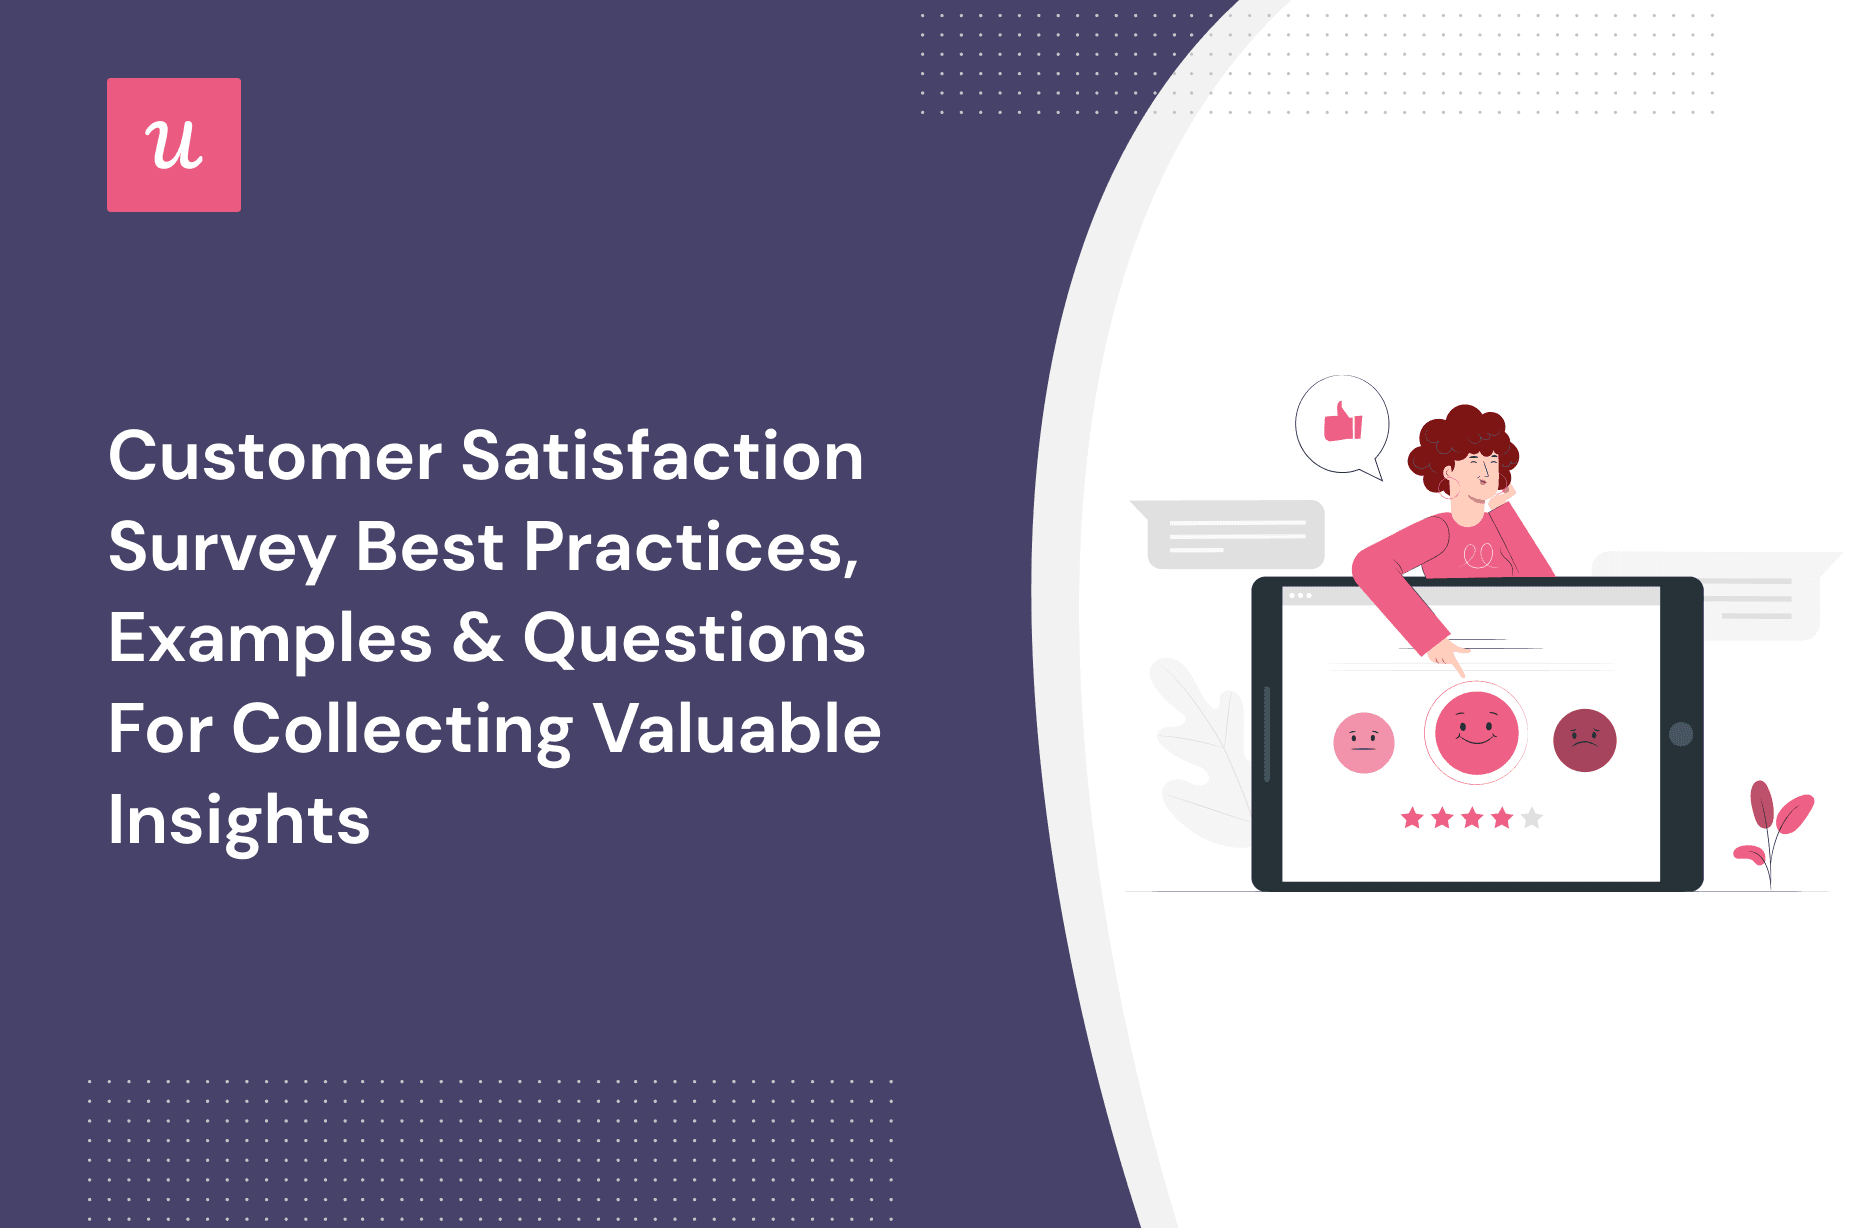 Customer Satisfaction Survey Best Practises, Examples & Questions cover